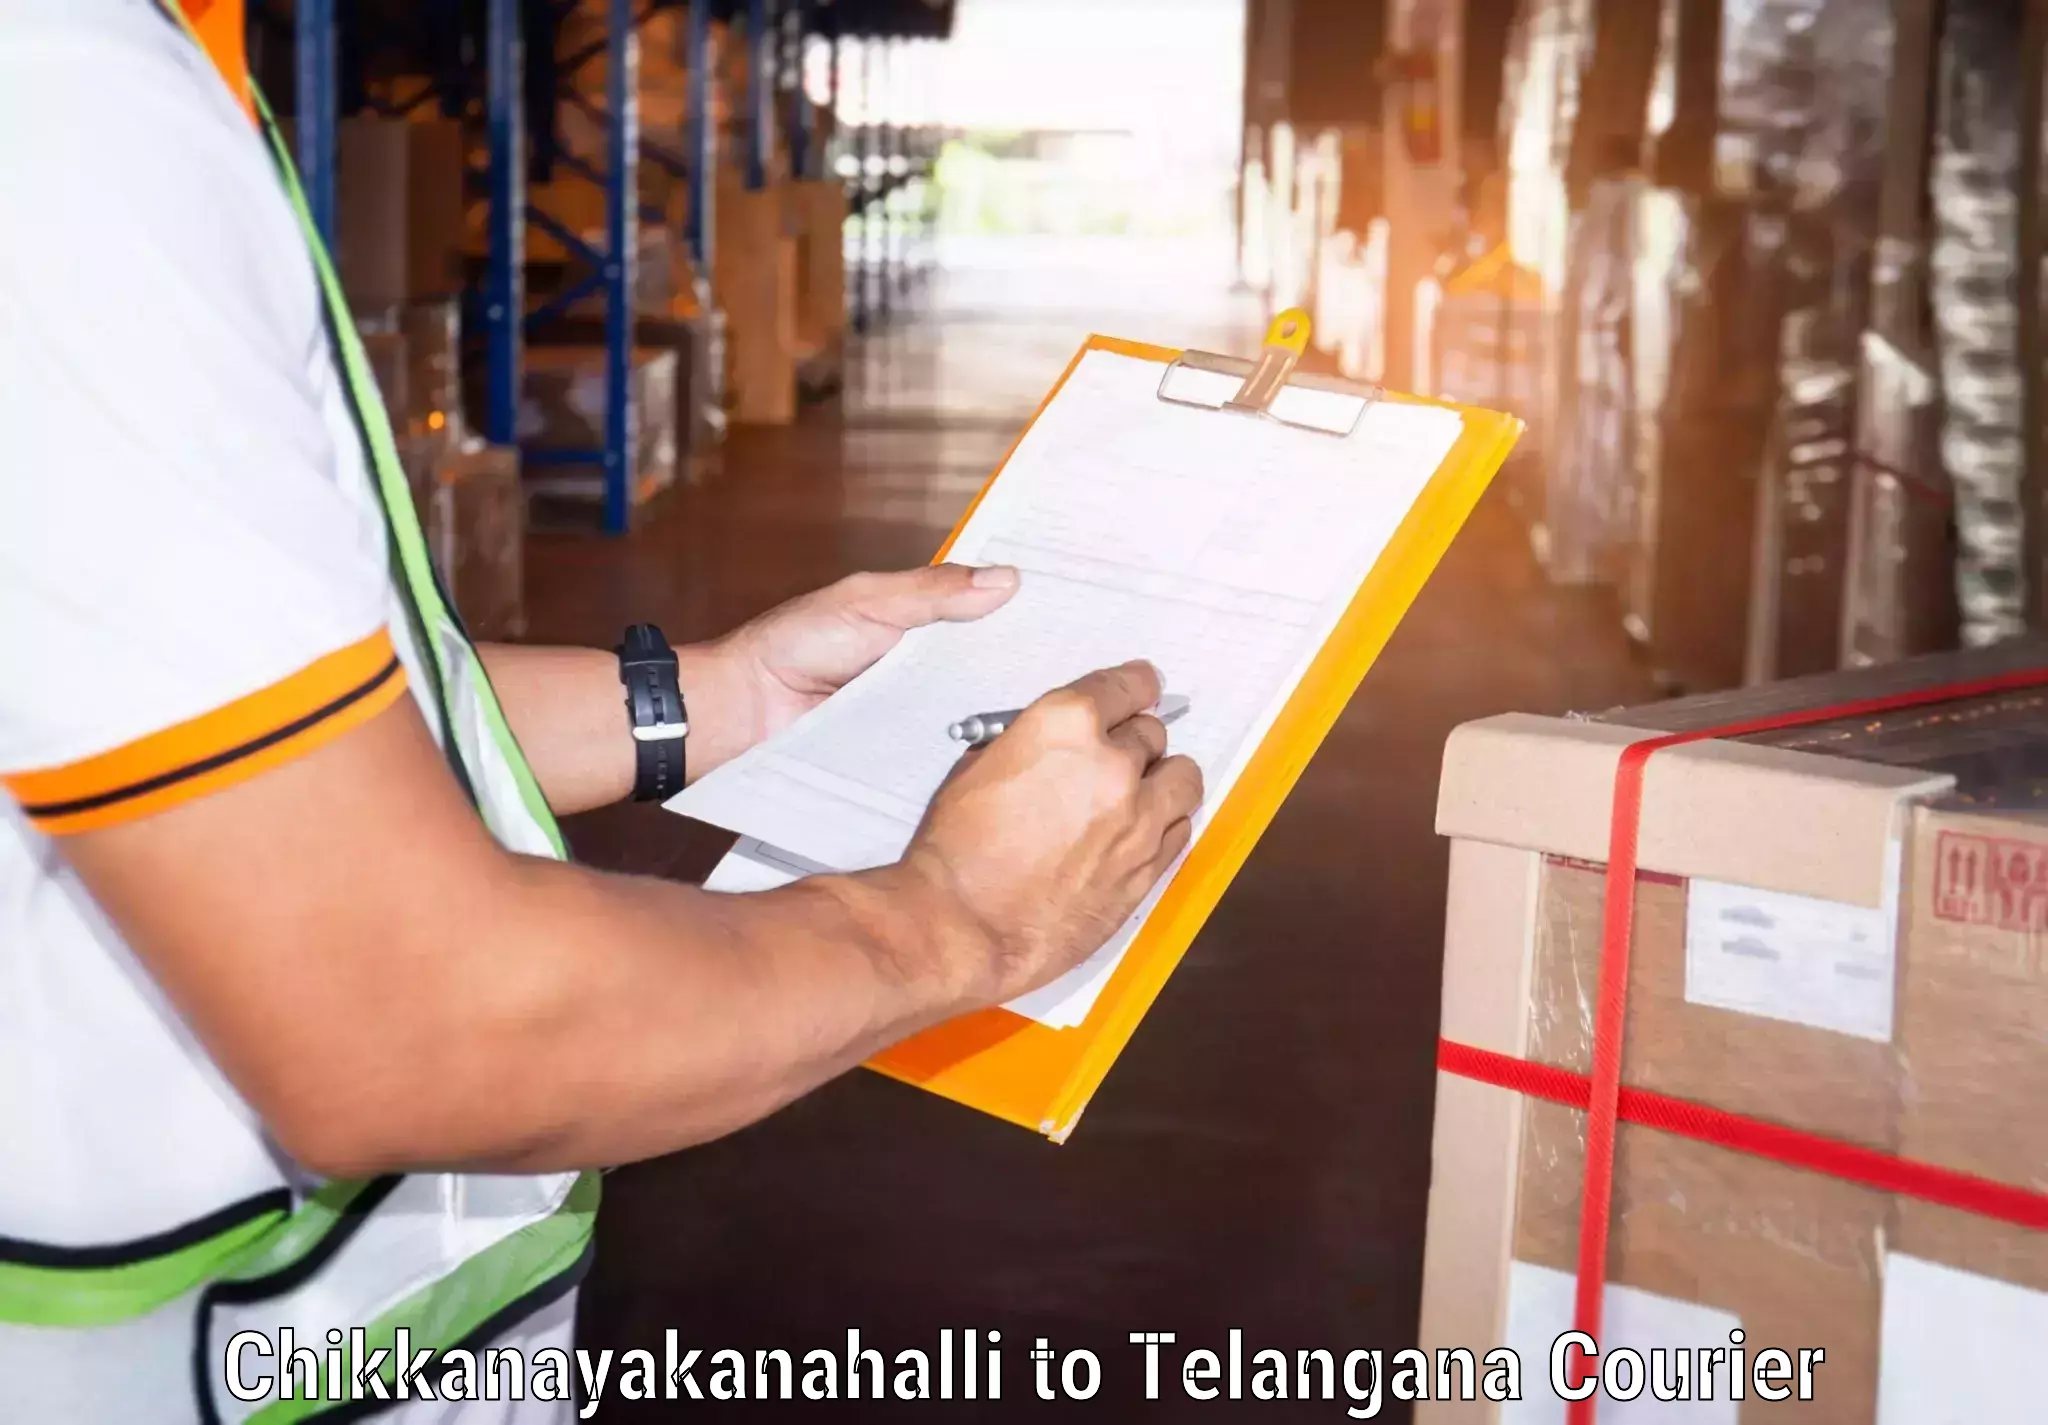 Courier dispatch services in Chikkanayakanahalli to Moinabad